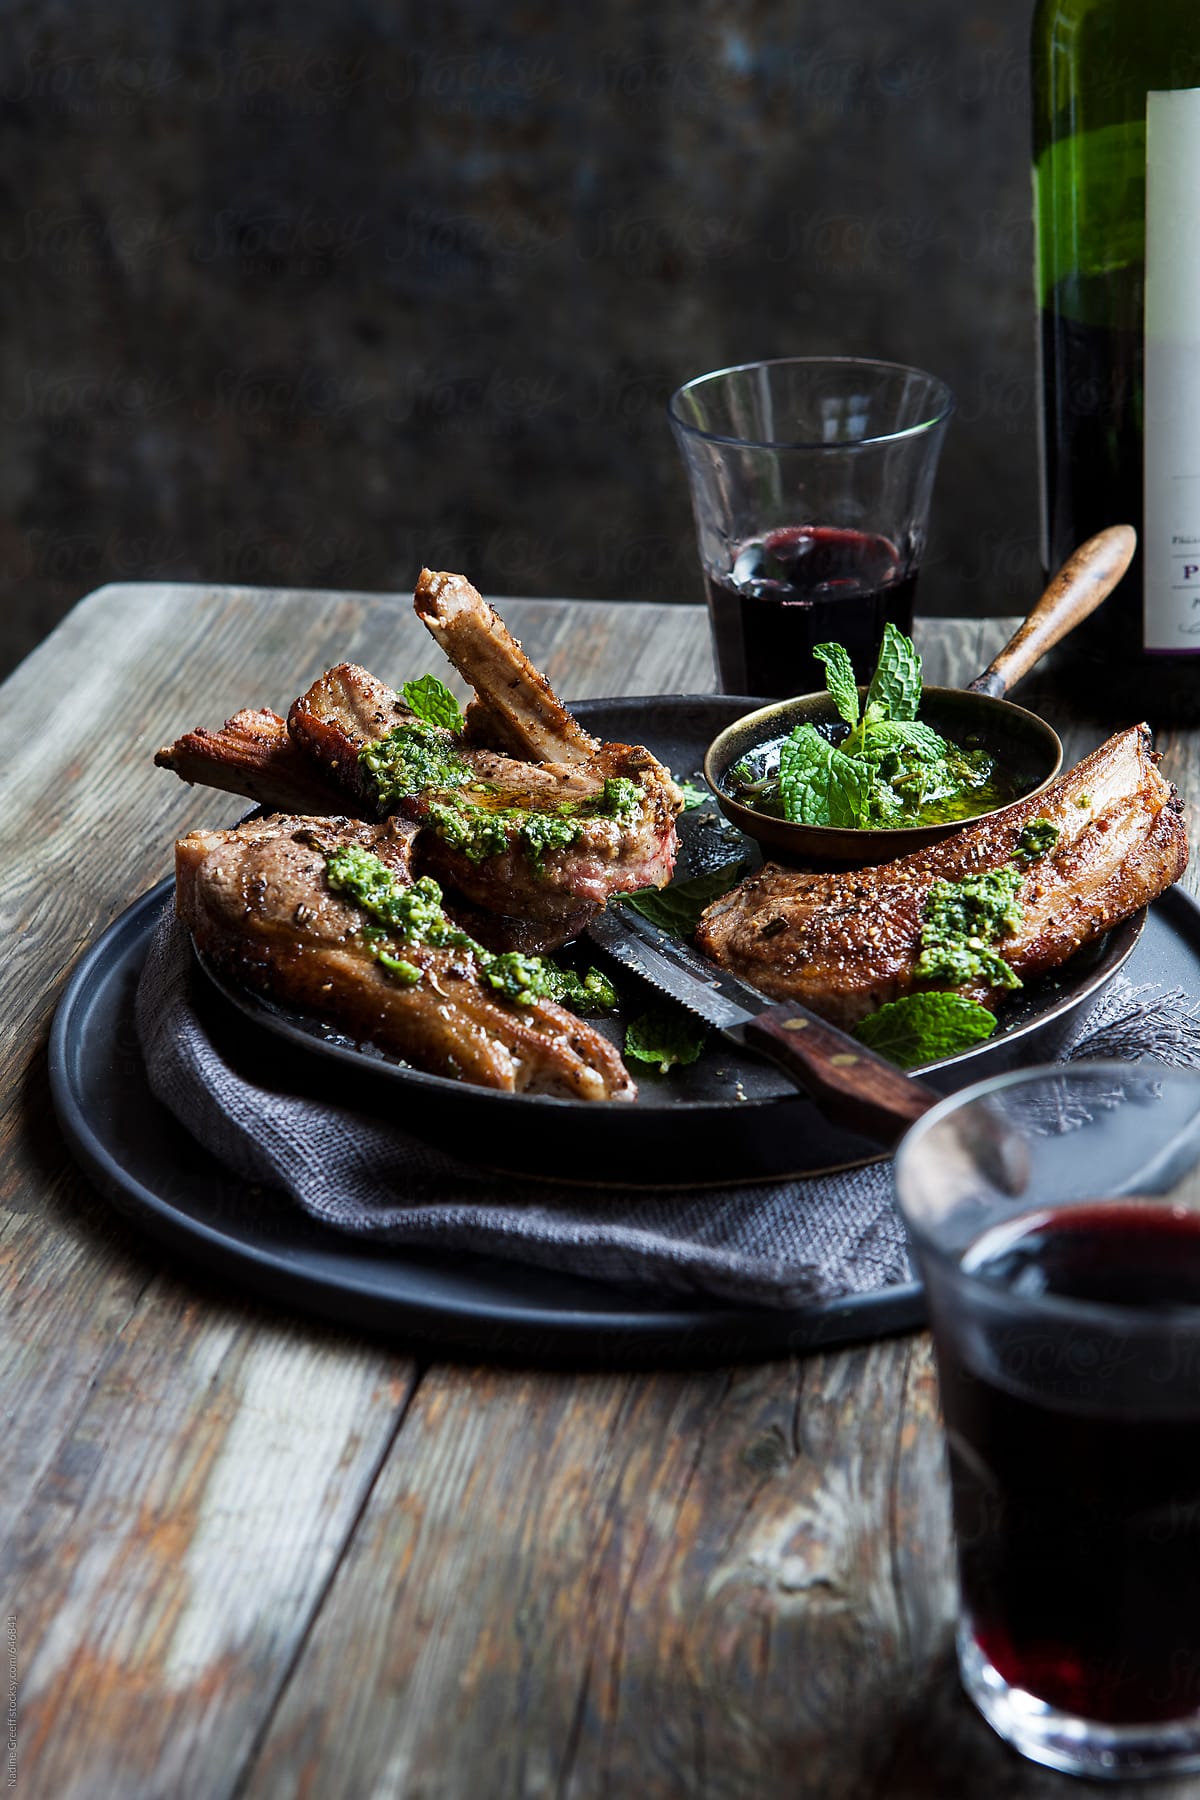 Meat lamb chops with chimichurri sauce and glasses of red wine